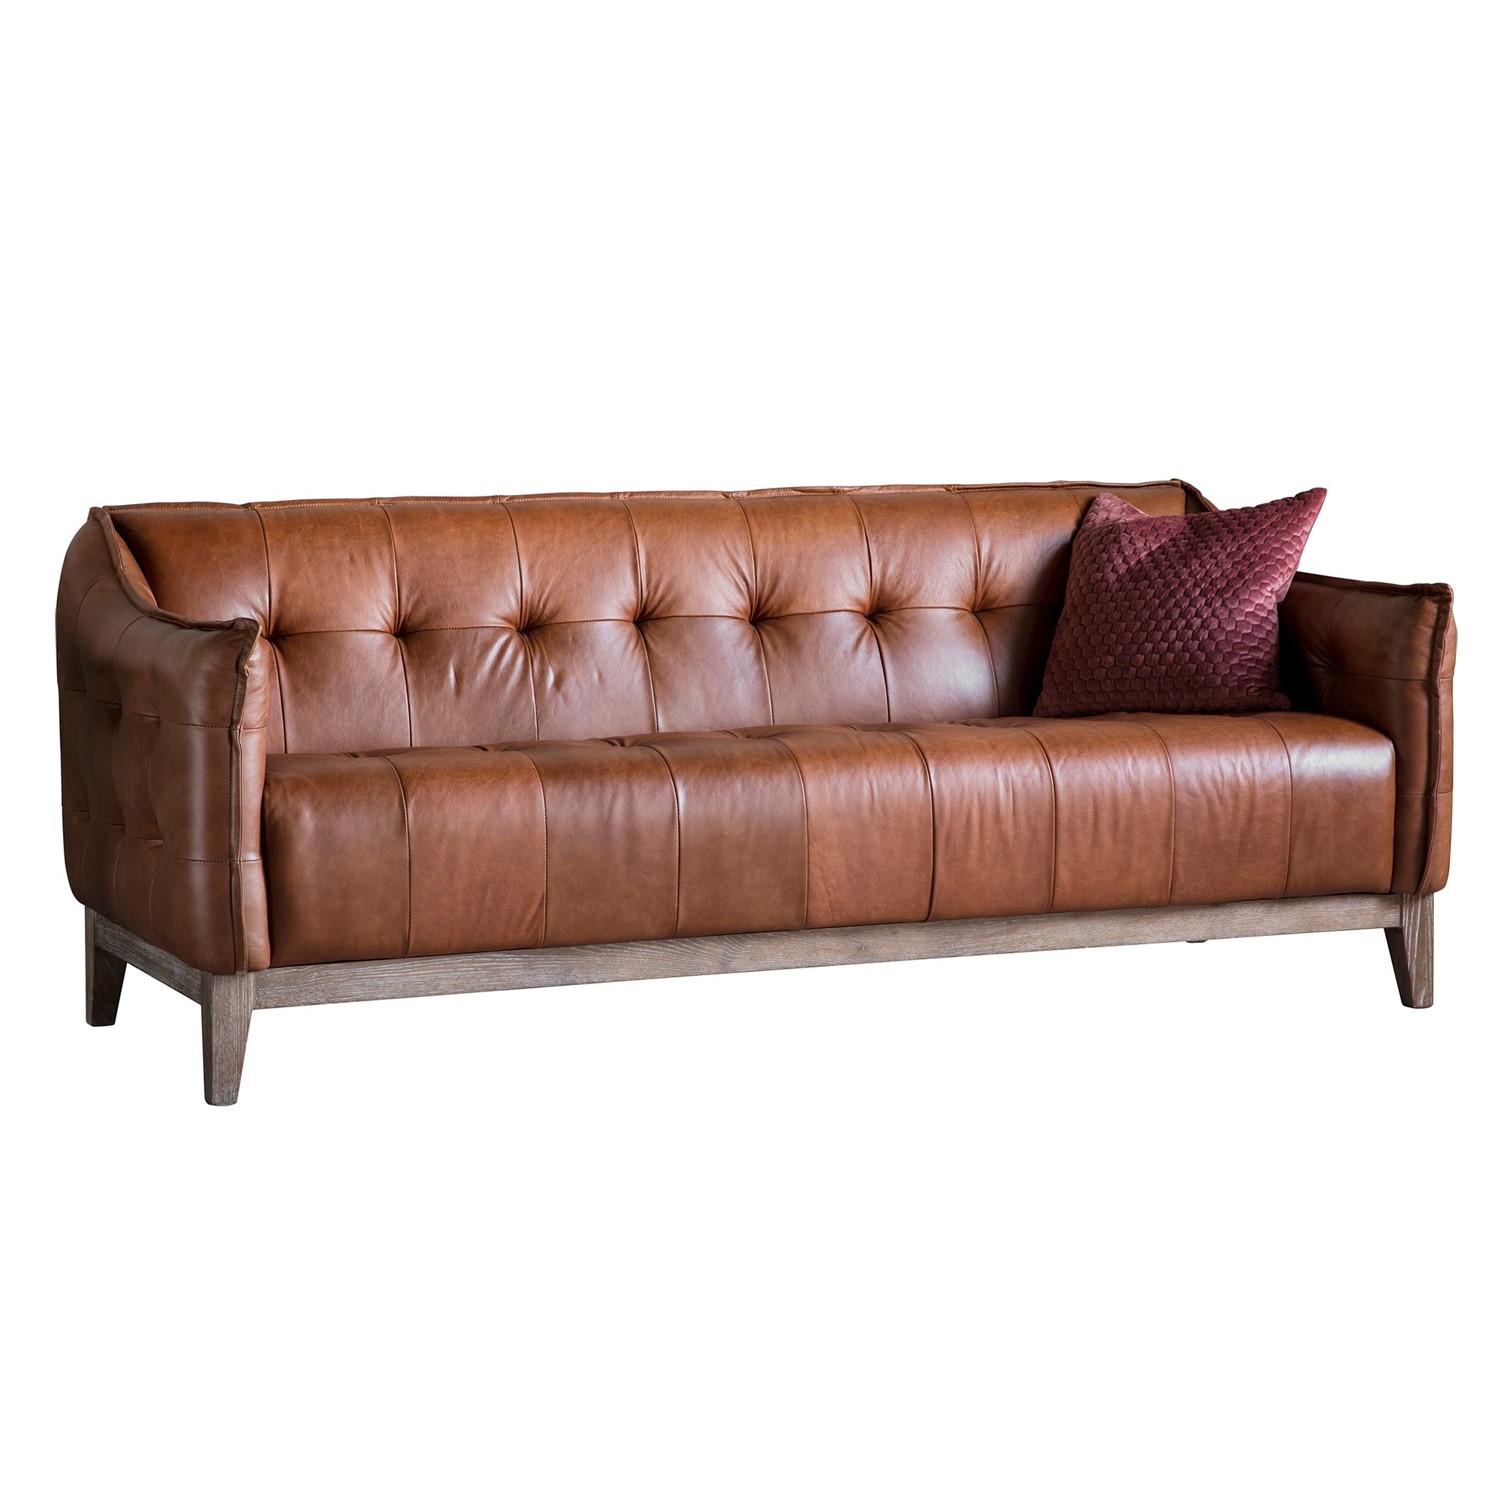 Gallery Ecclestone Brown 3 Seater, Leather Sofa 3 Seater